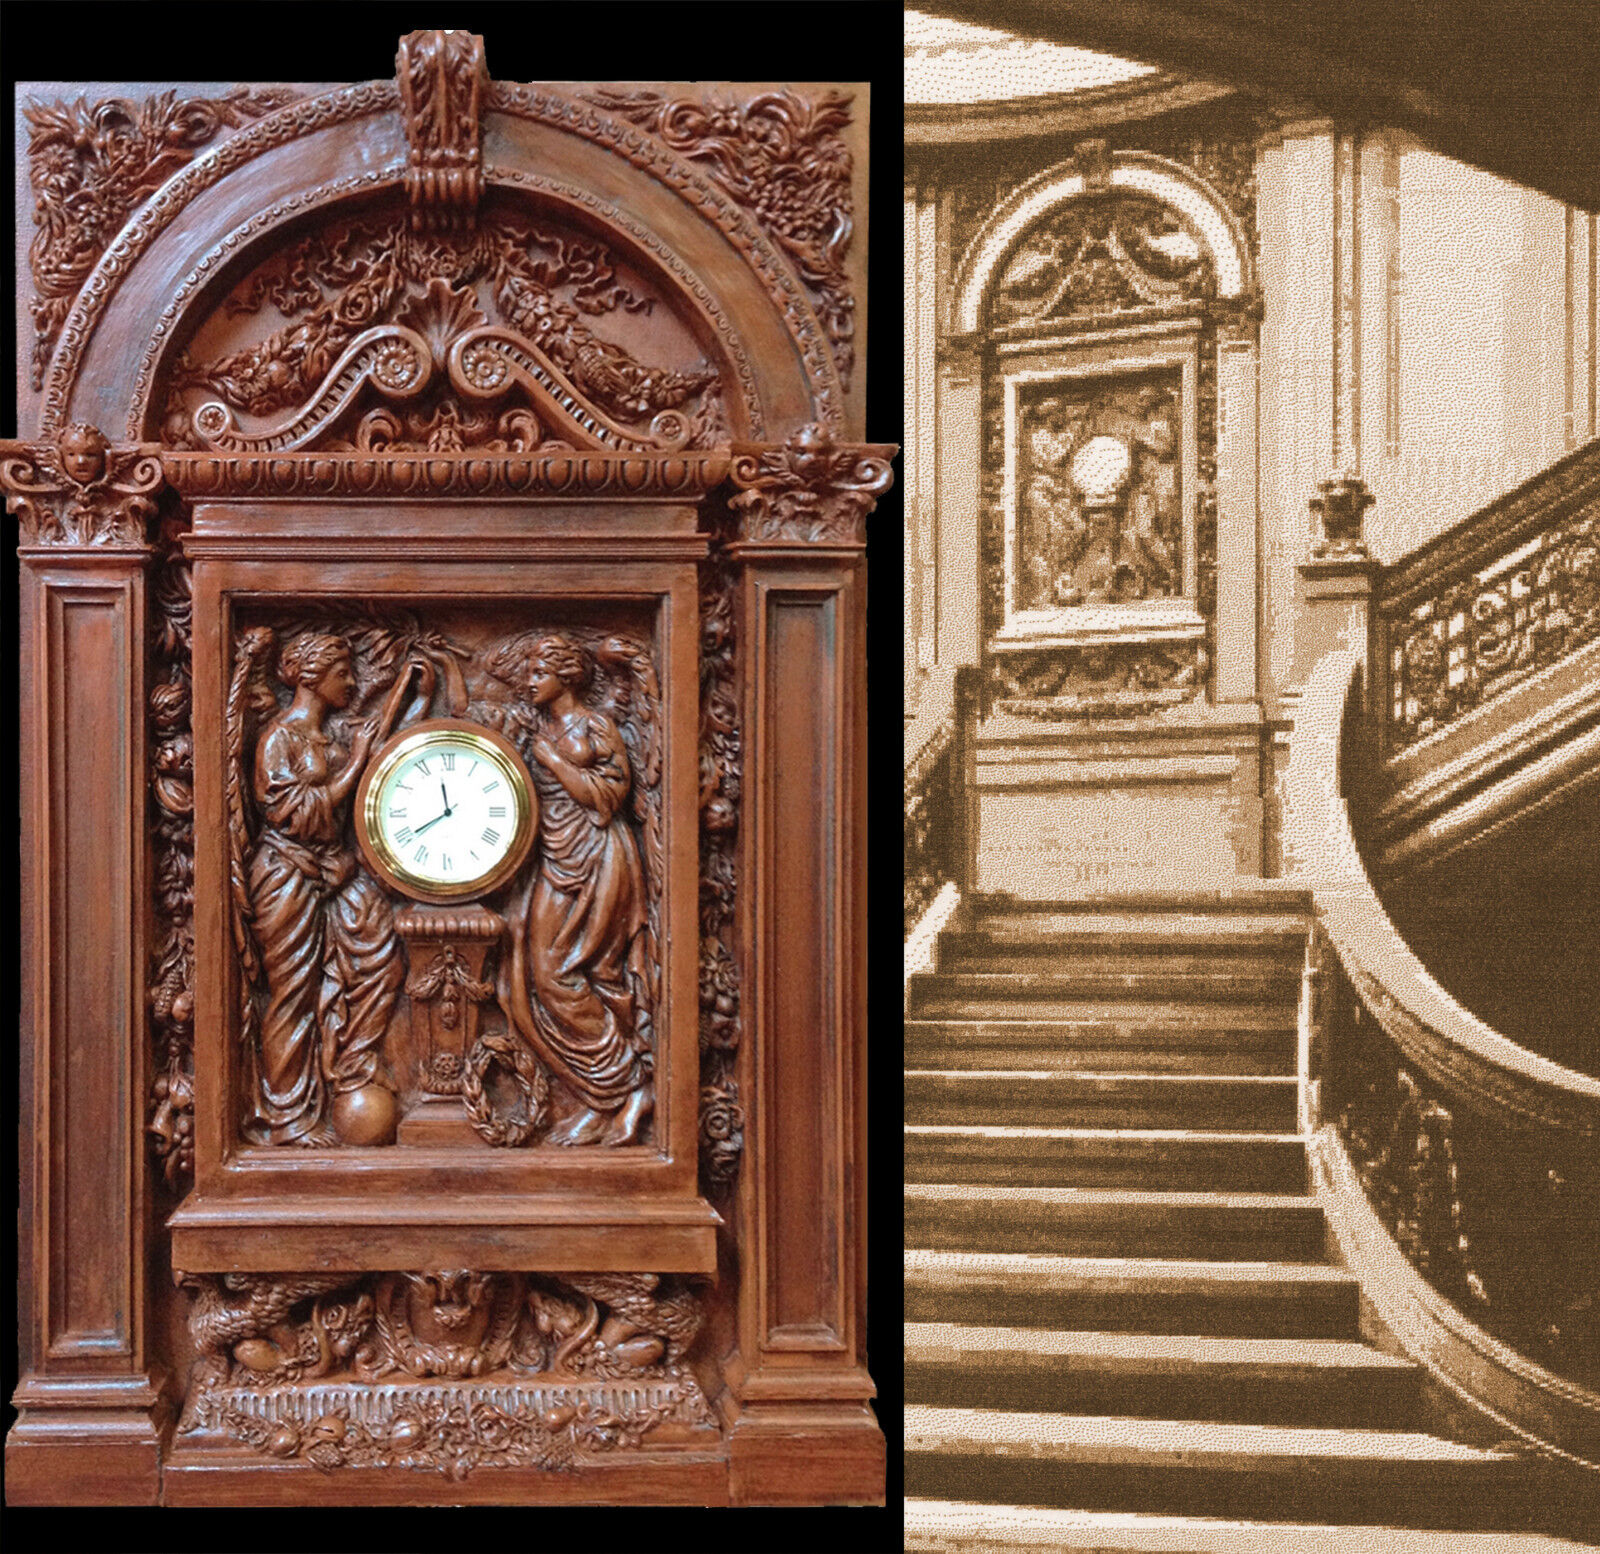 rms TITANIC Clock-White Star Line- with architectural surround